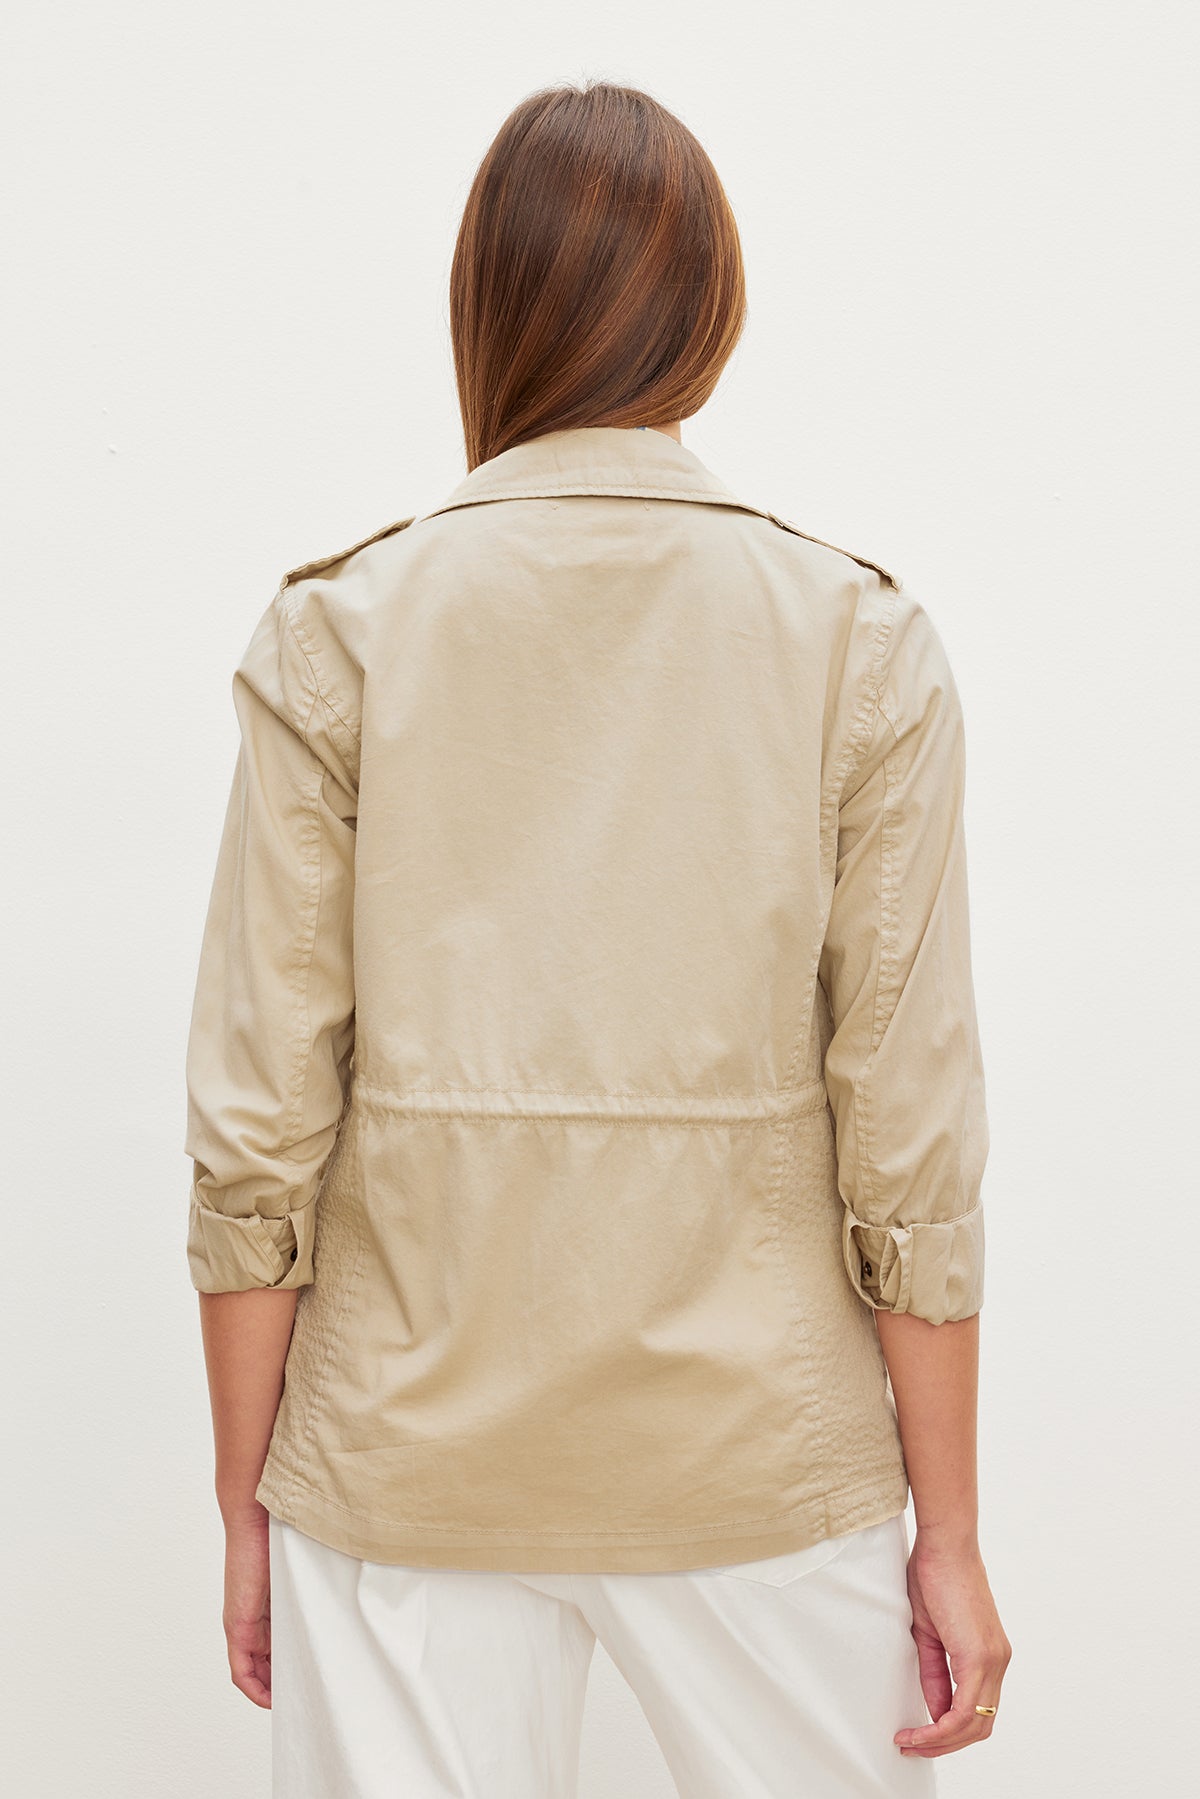   The back view of a woman wearing a RUBY LIGHT-WEIGHT ARMY JACKET made by Velvet by Graham & Spencer, showcasing its versatility. 